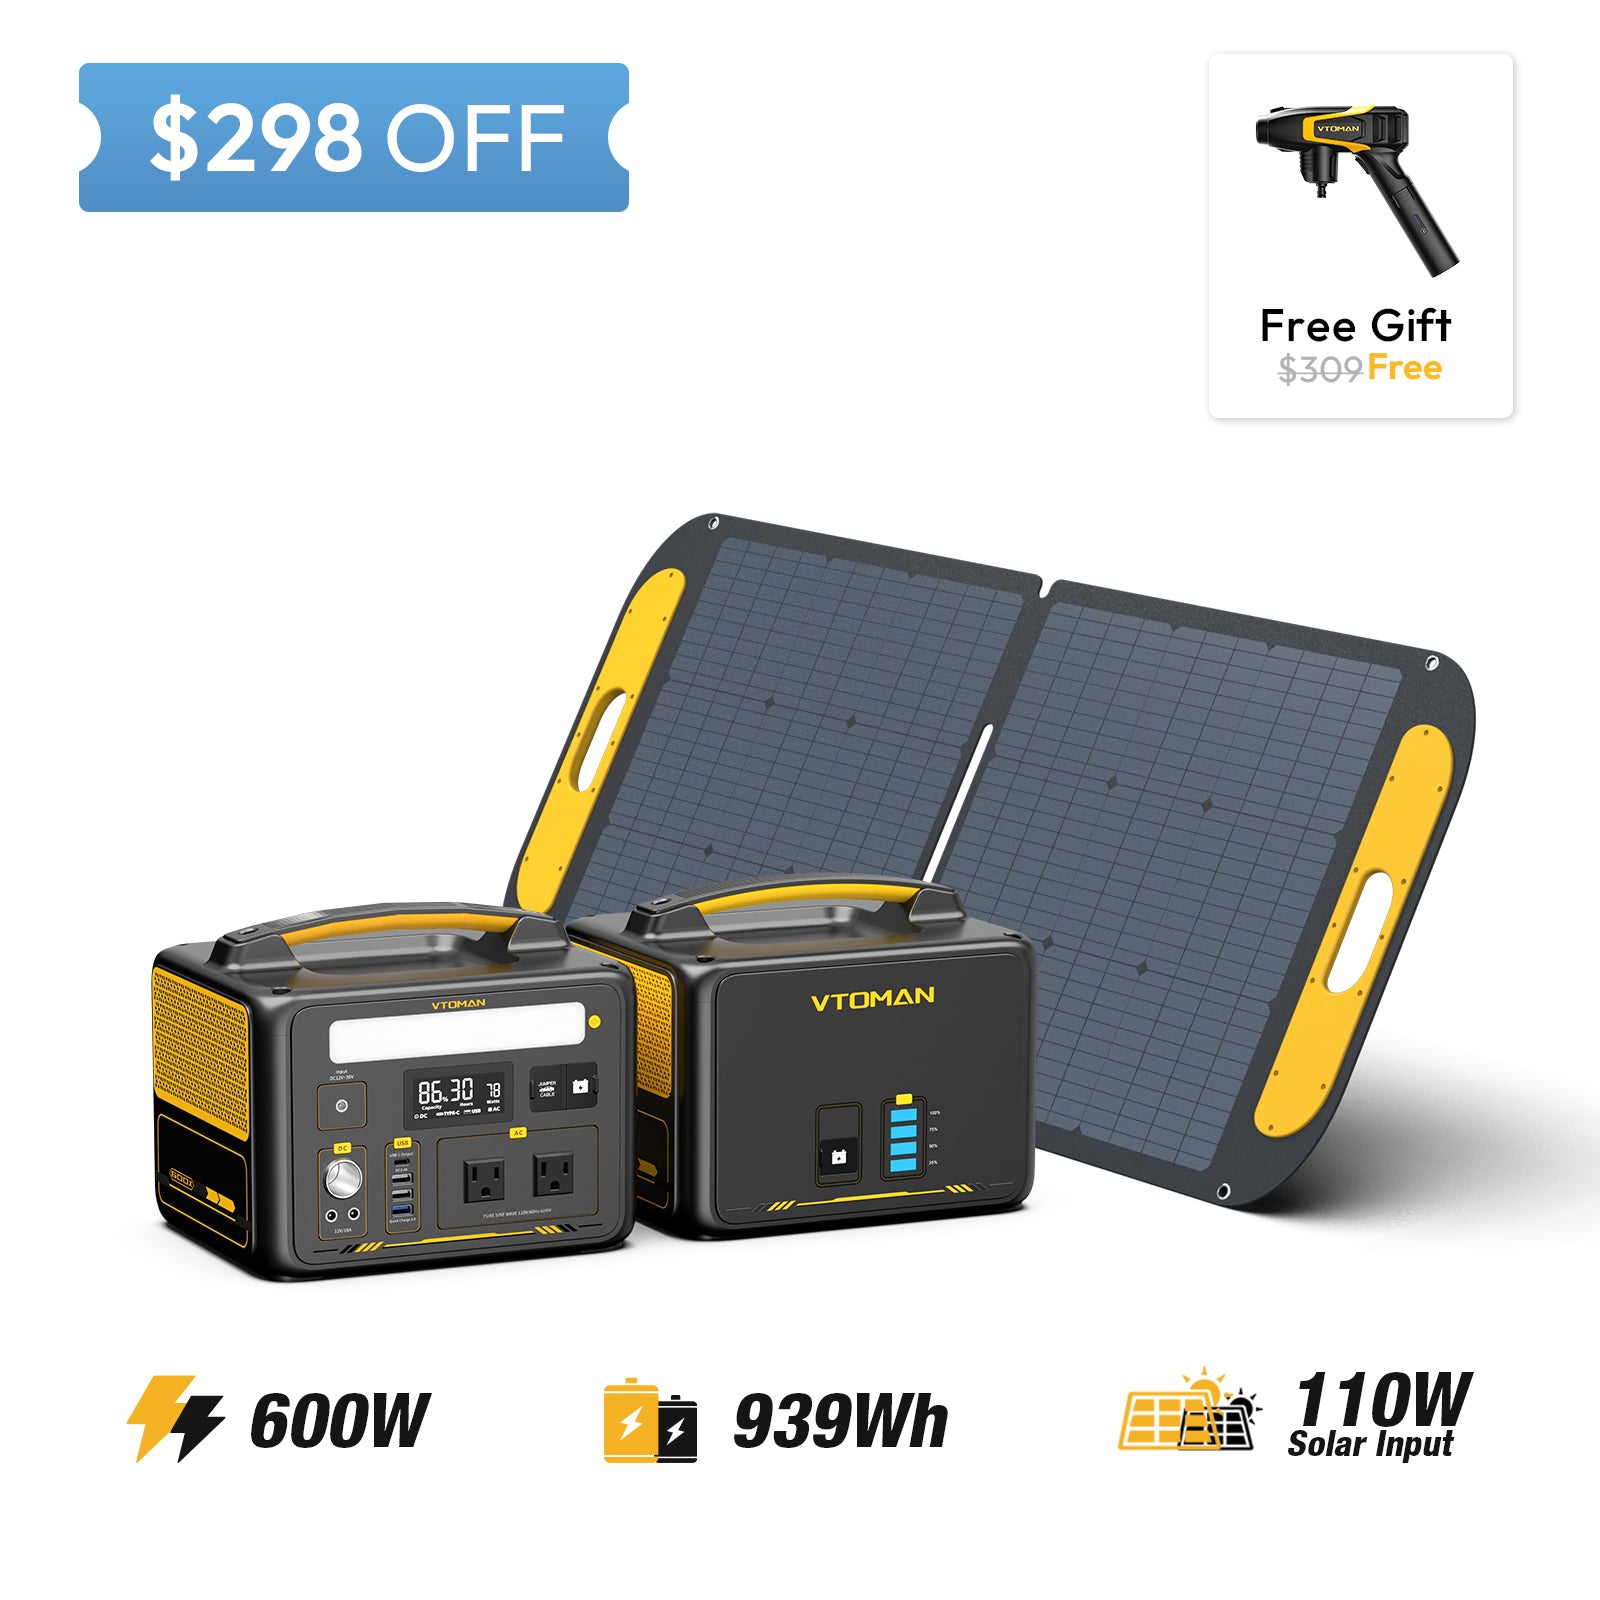 Jump 600x and 640wh extra battery and 110w solar panel save $298 in summer sale